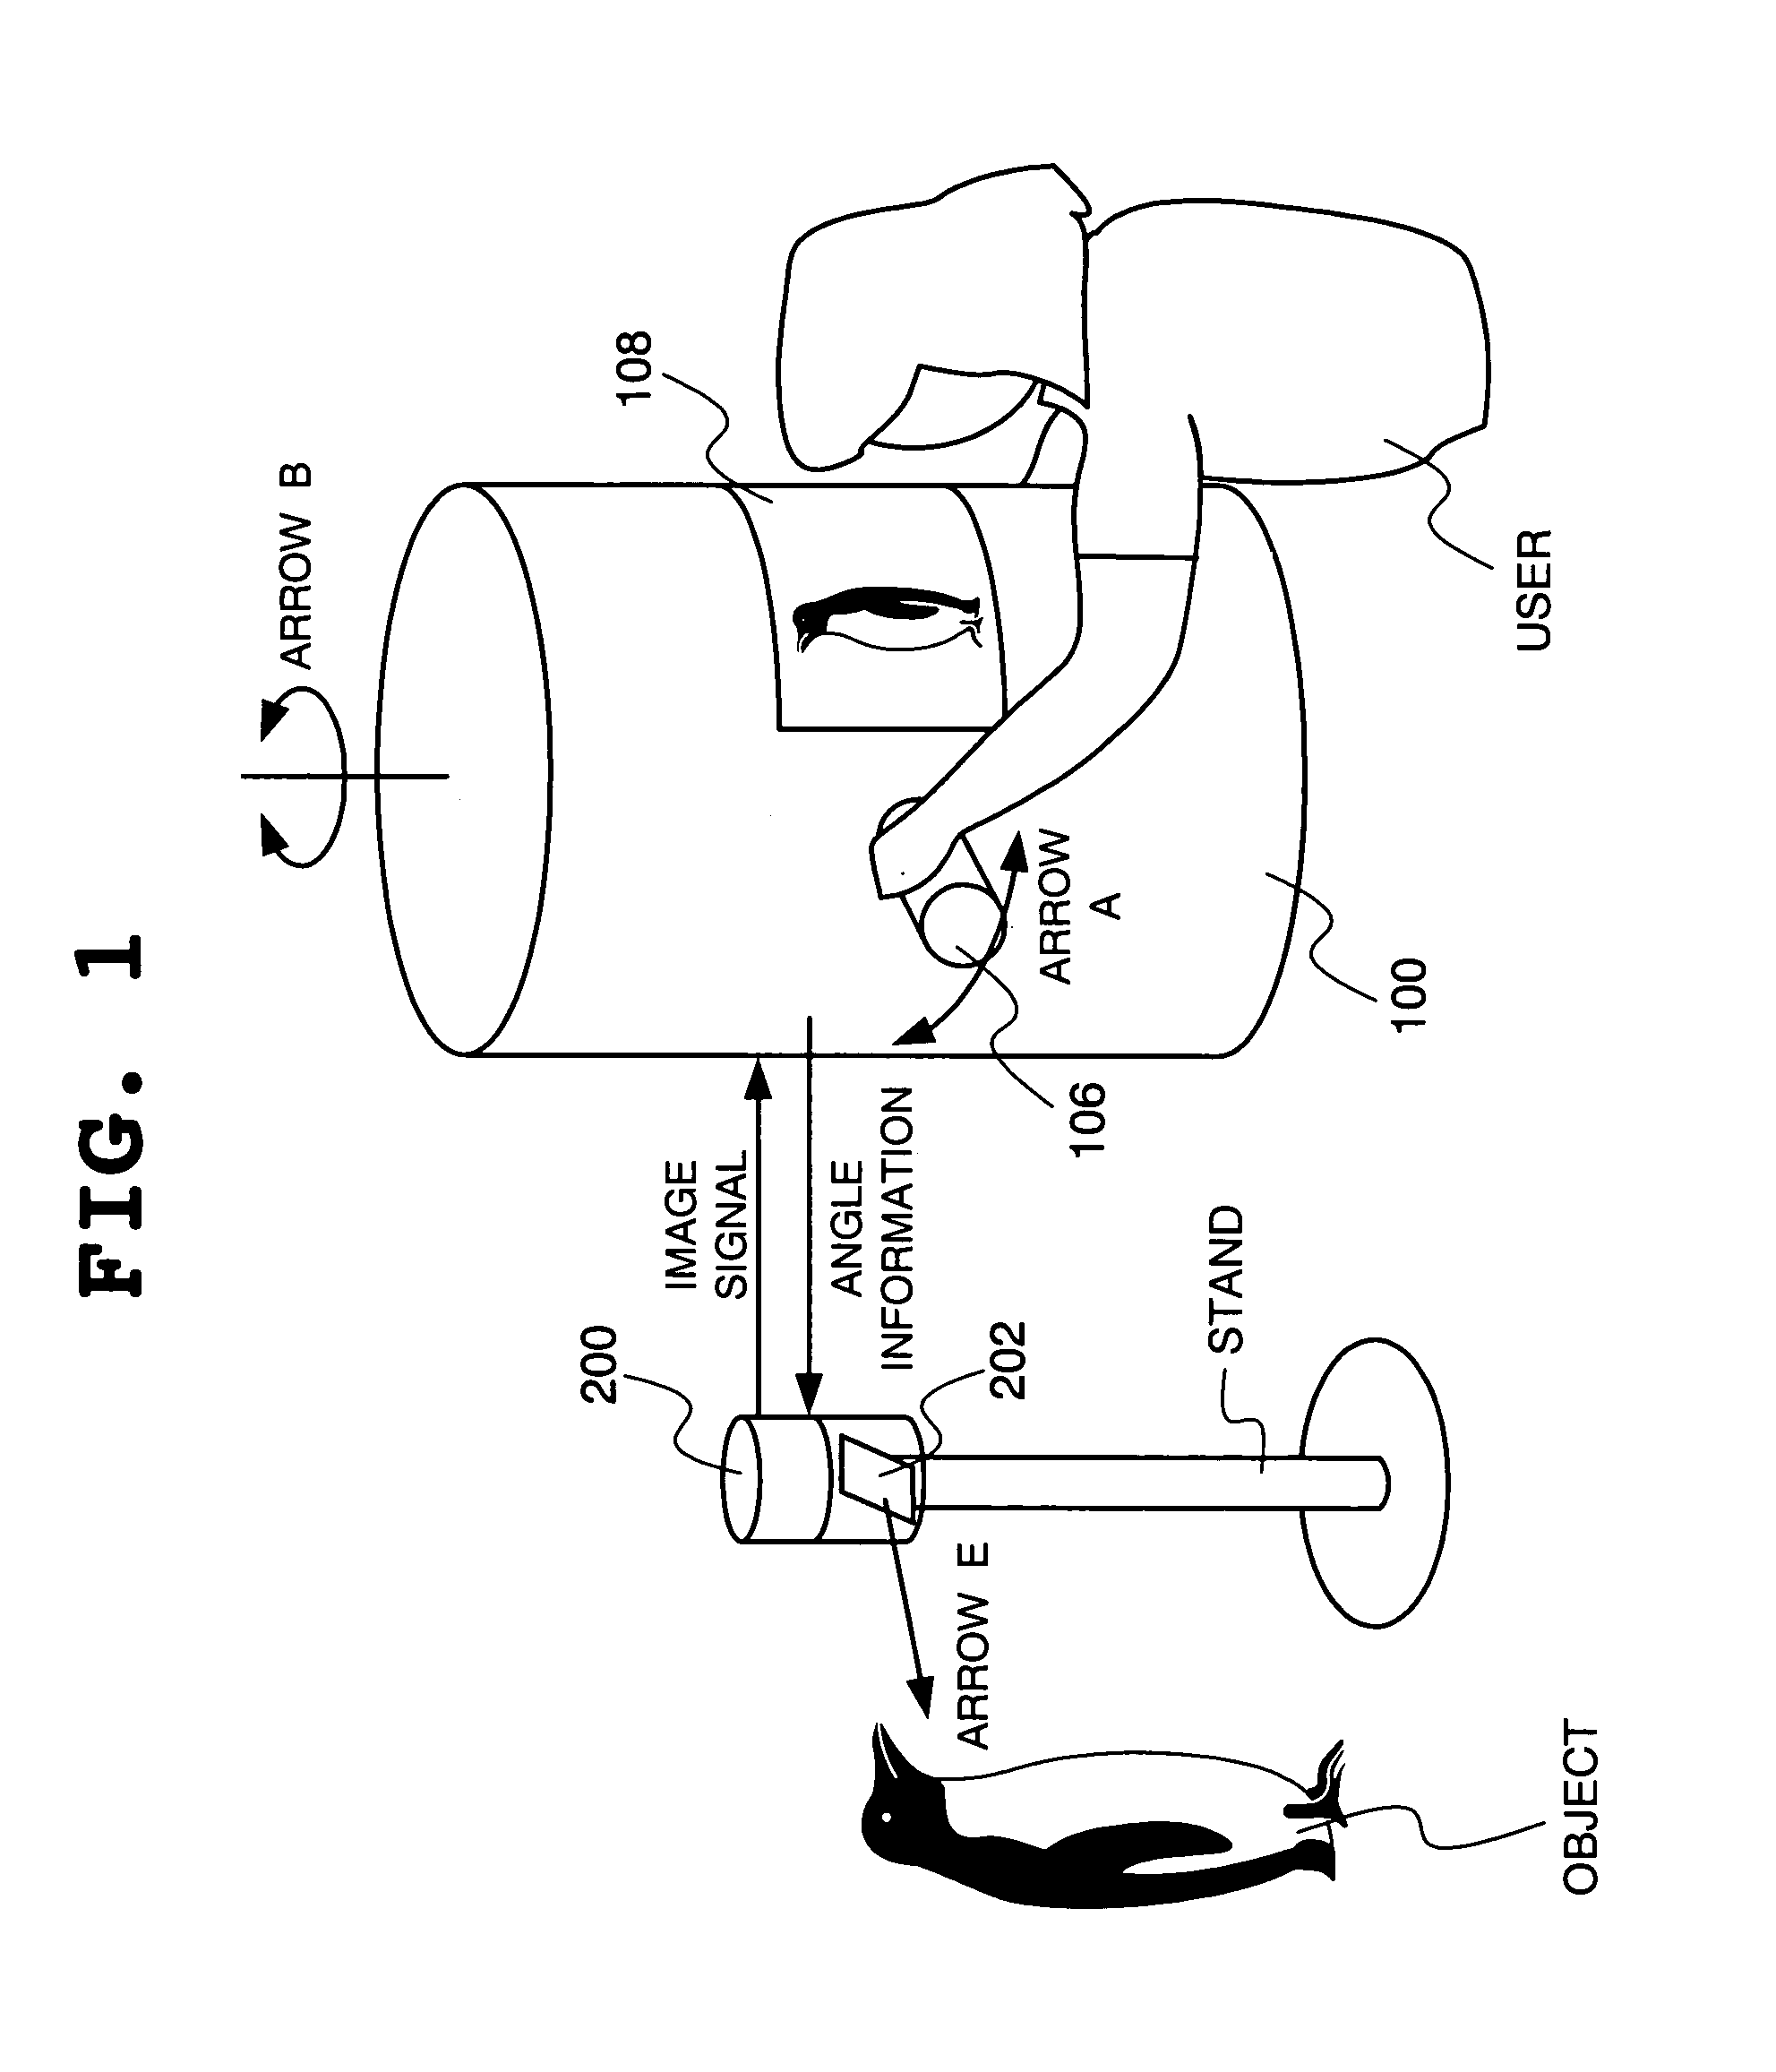 Rotary image viewing apparatus connected to a rotary mirror camera